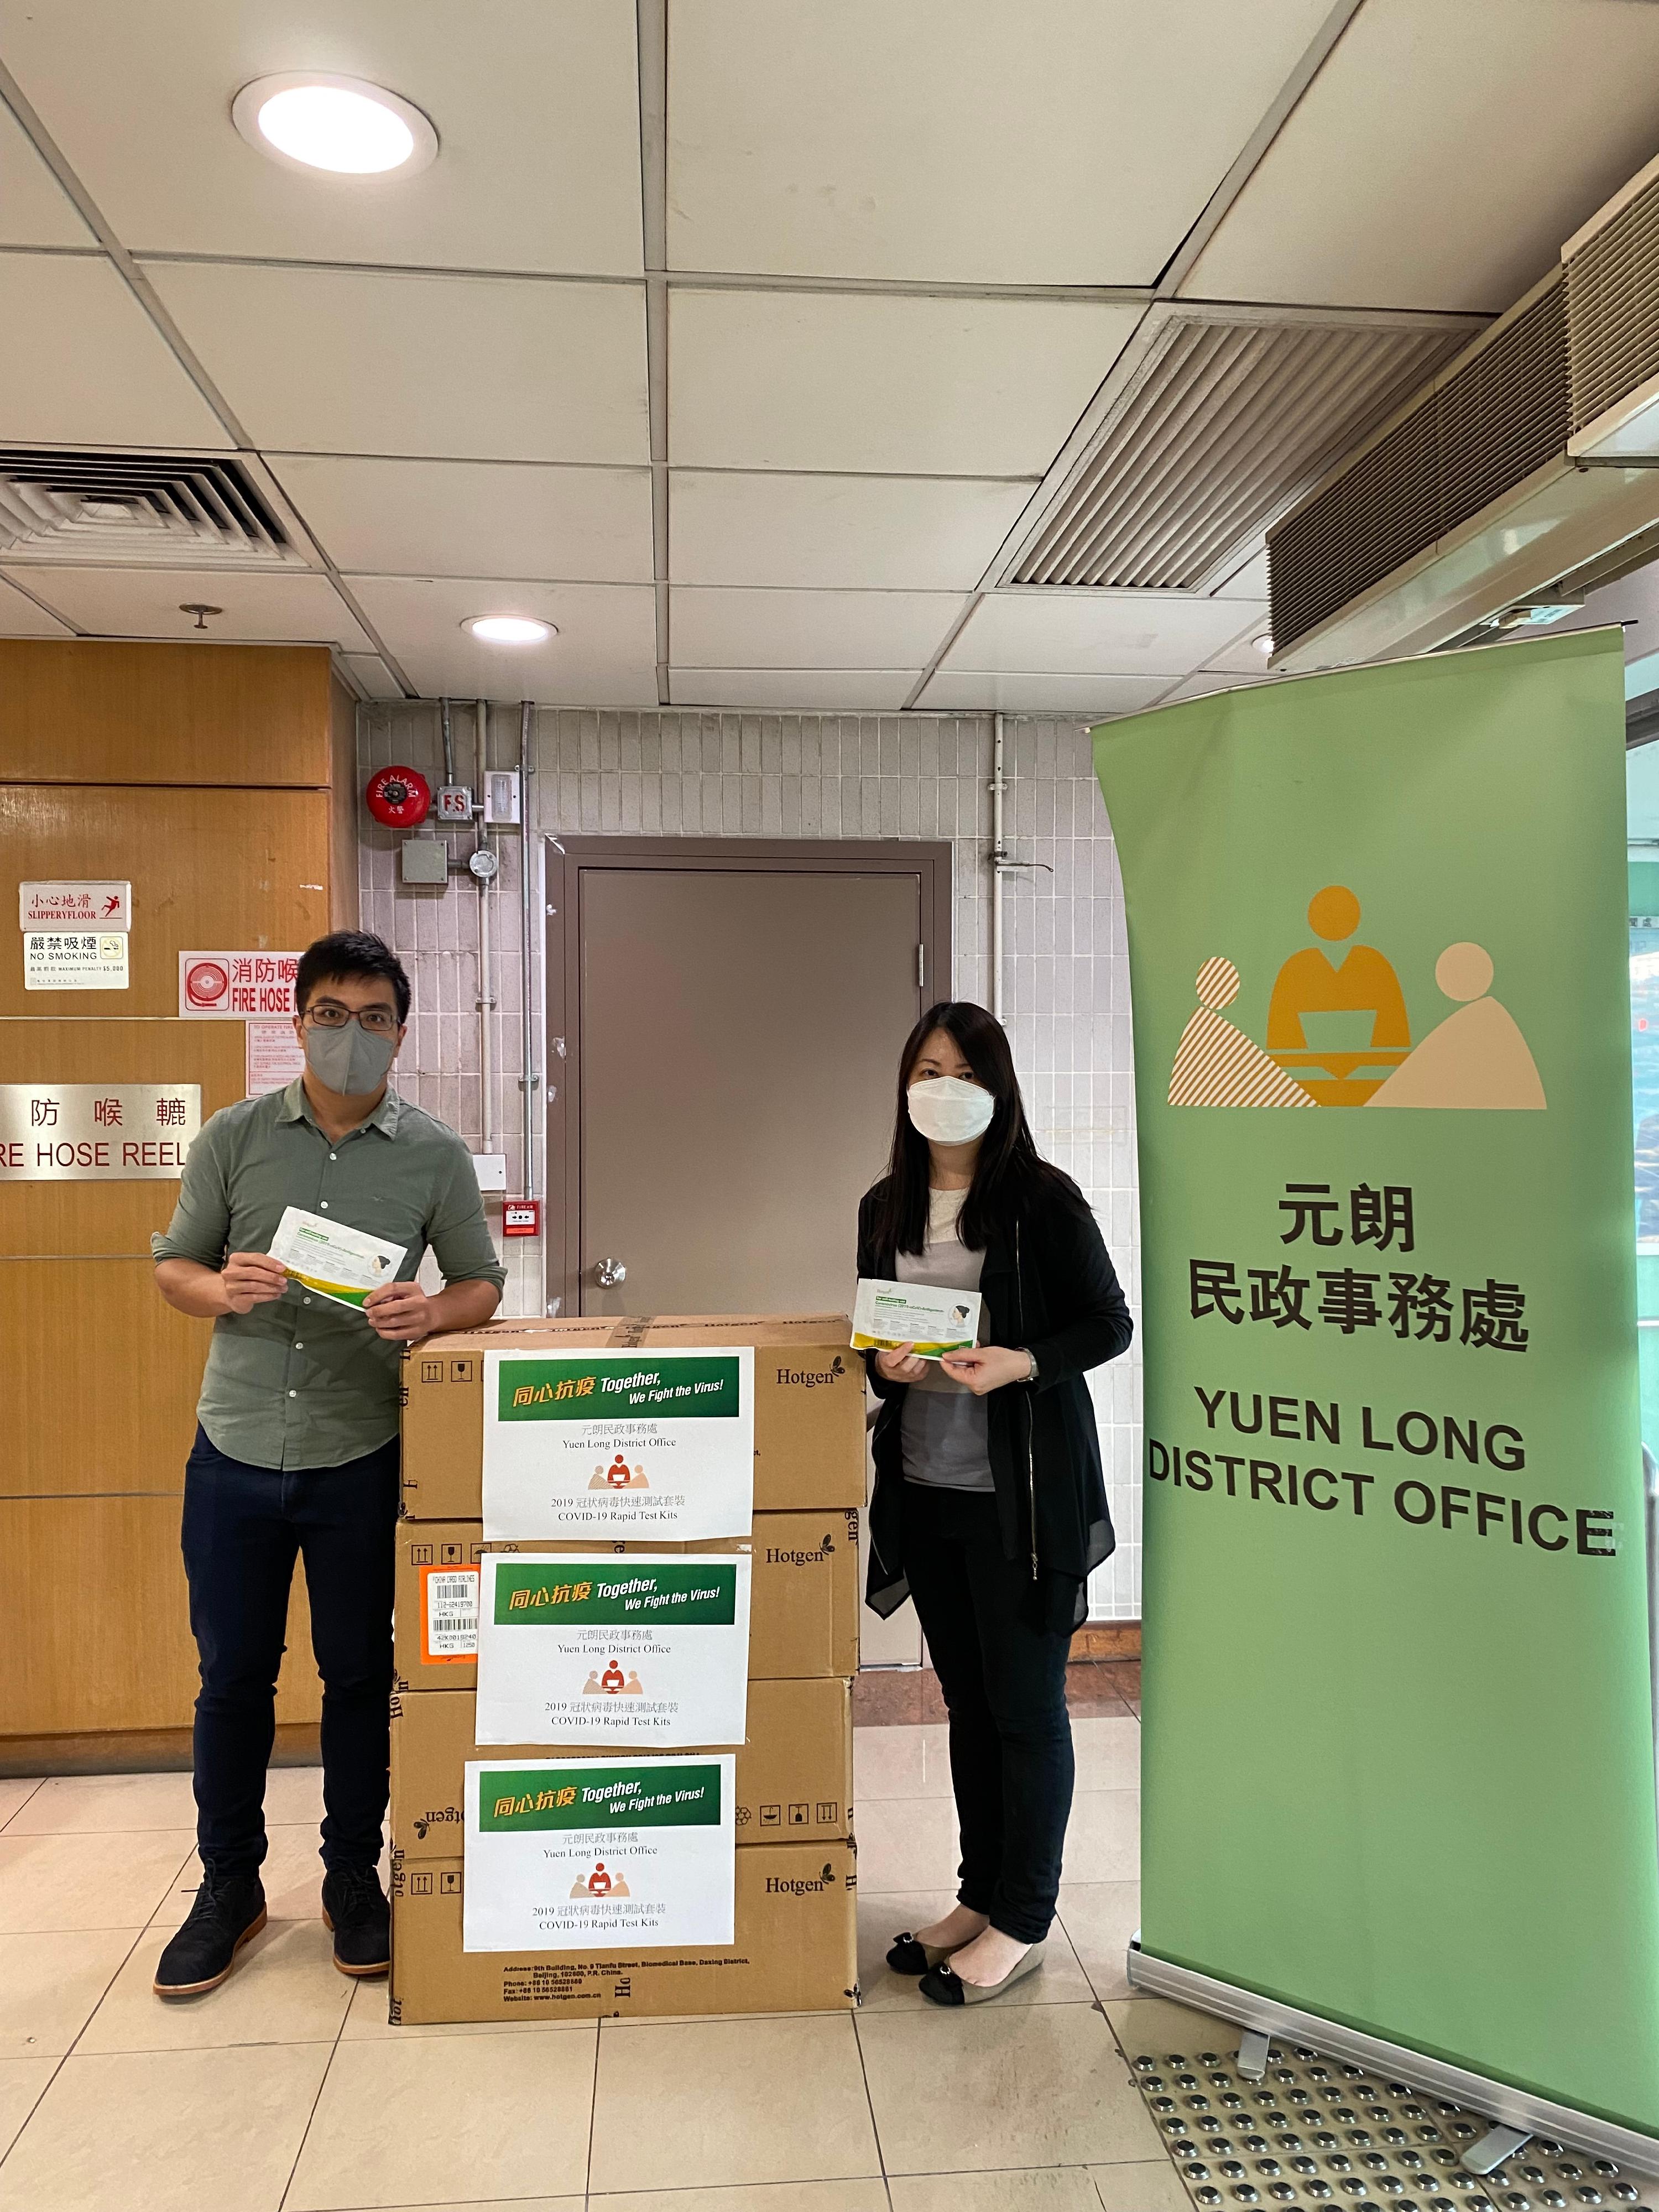 The Yuen Long District Office today (March 3) distributed COVID-19 rapid test kits to households, cleansing workers and property management staff living and working in Ping Yan Court for voluntary testing through the Housing Department and the property management company.